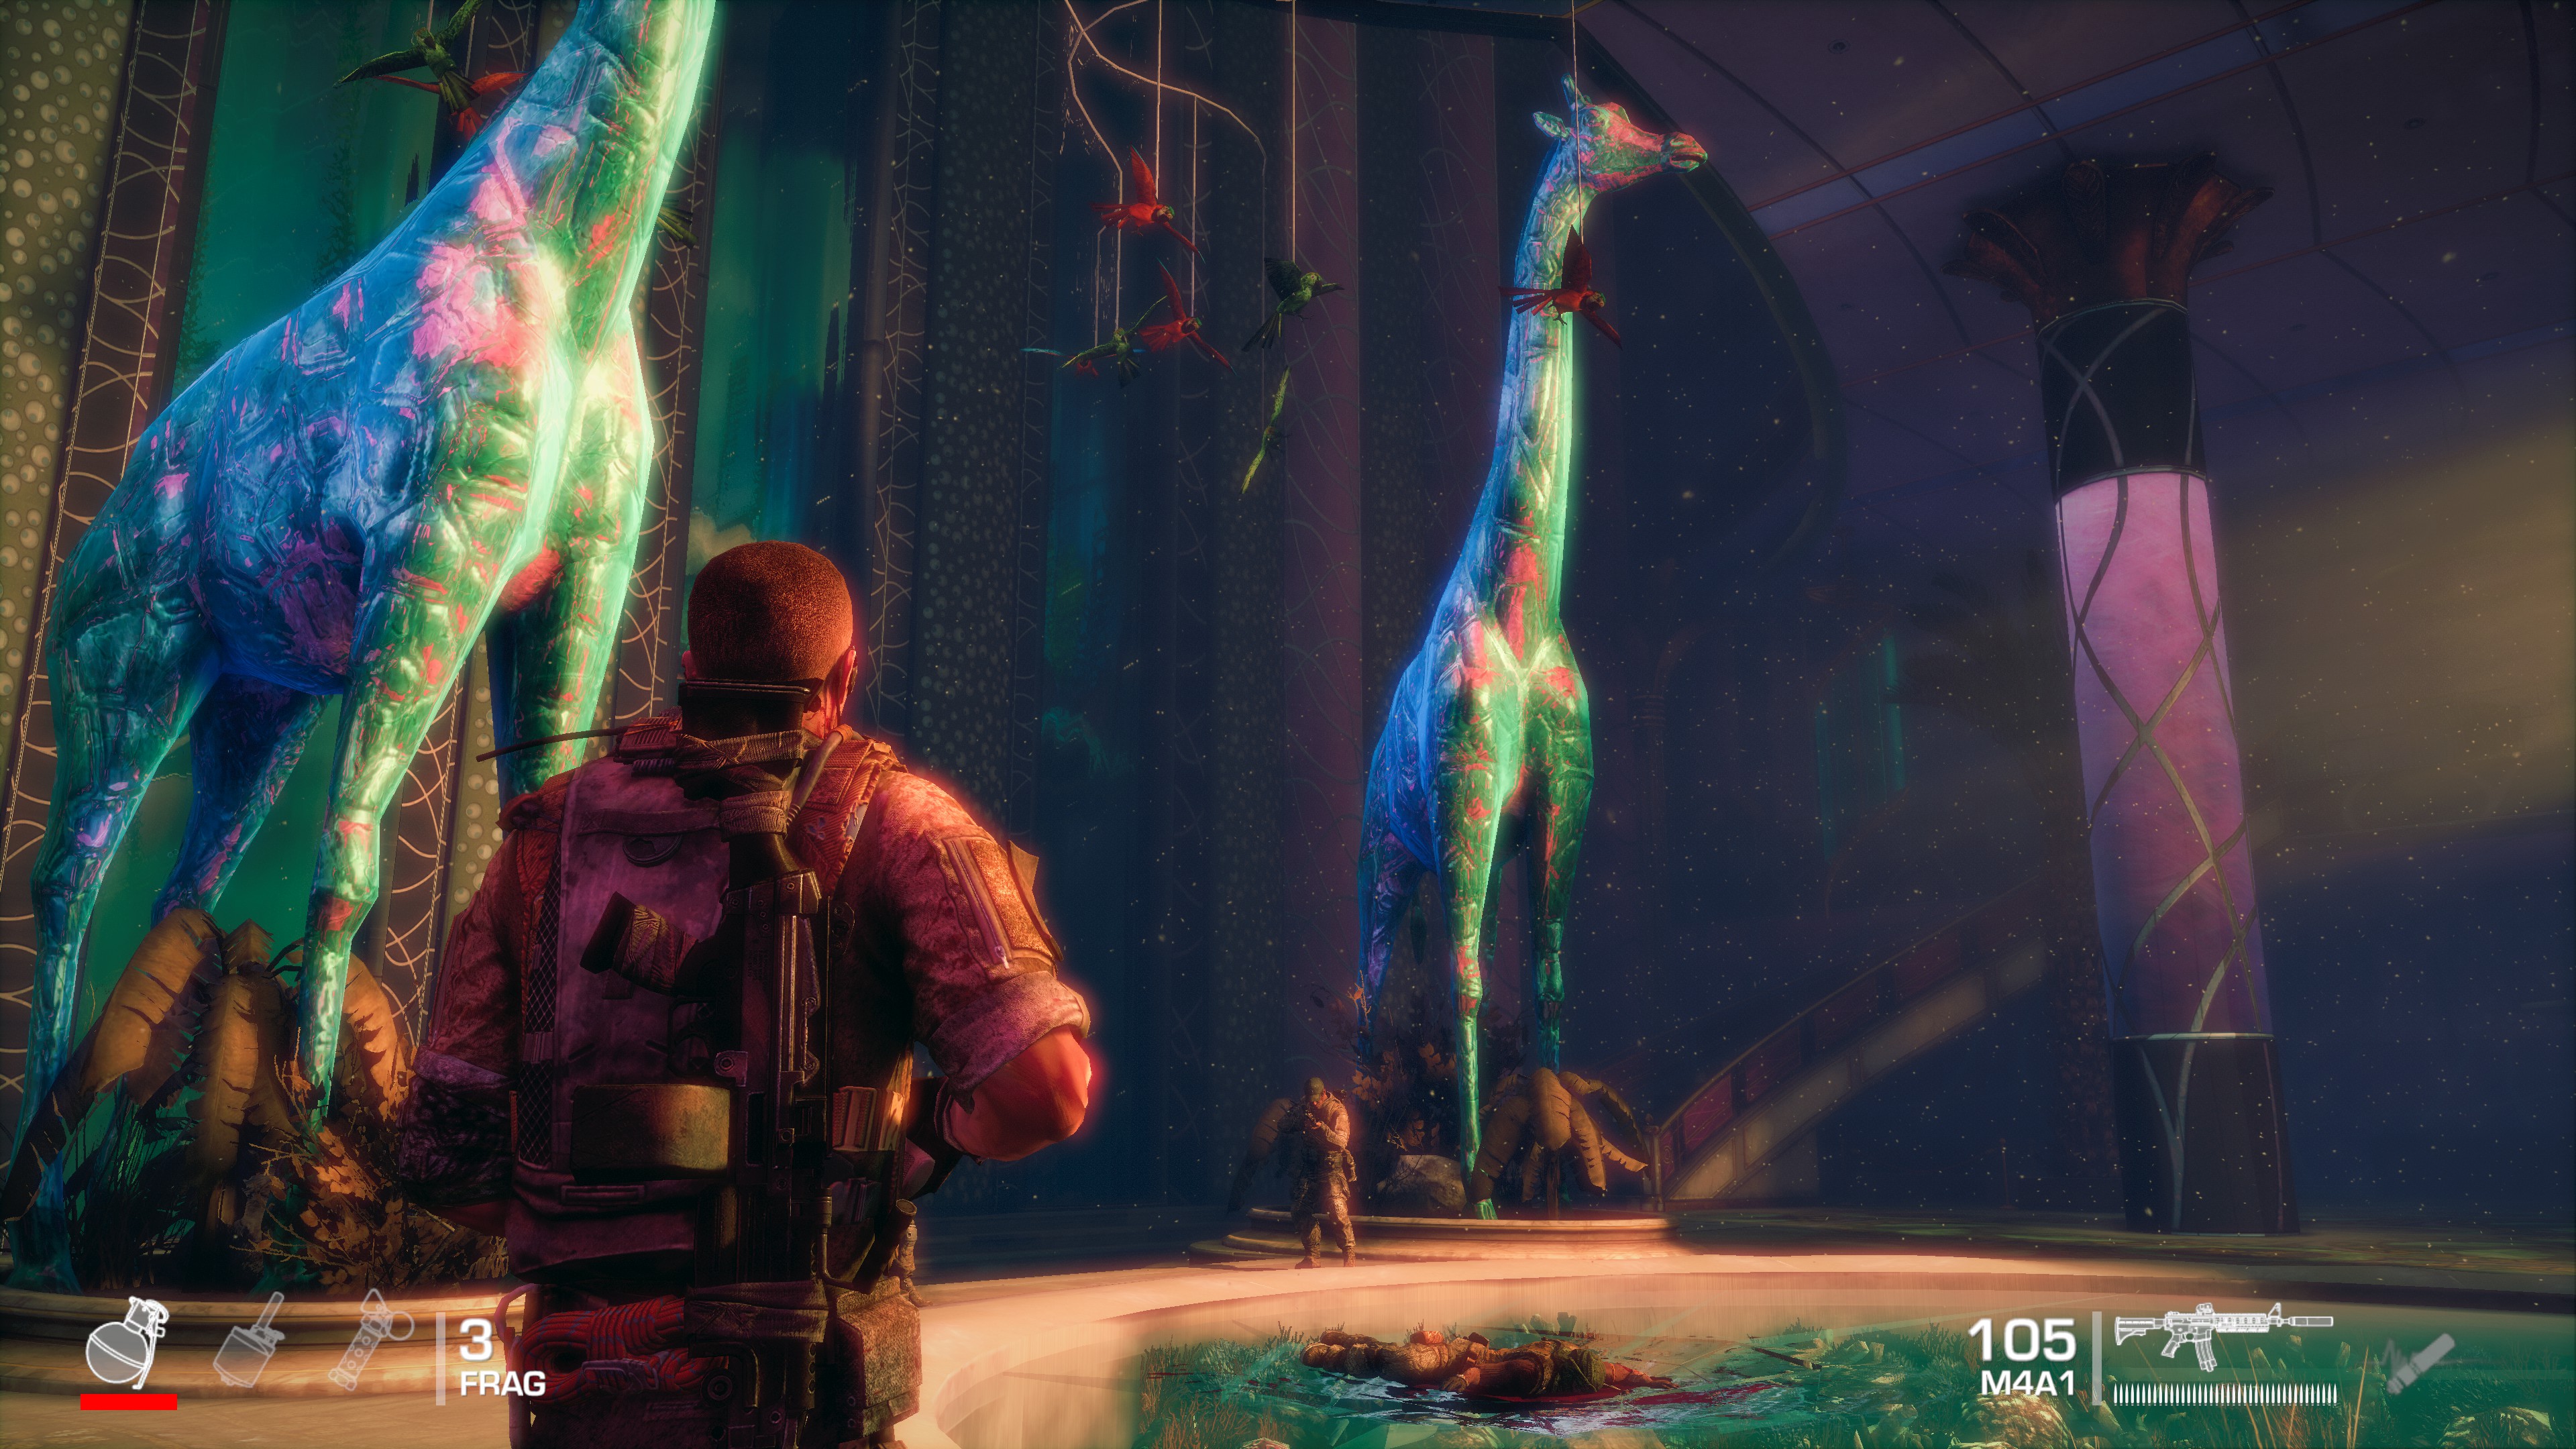 The Art in Spec Ops the Line is fantastic [warning: image heavy] | NeoGAF